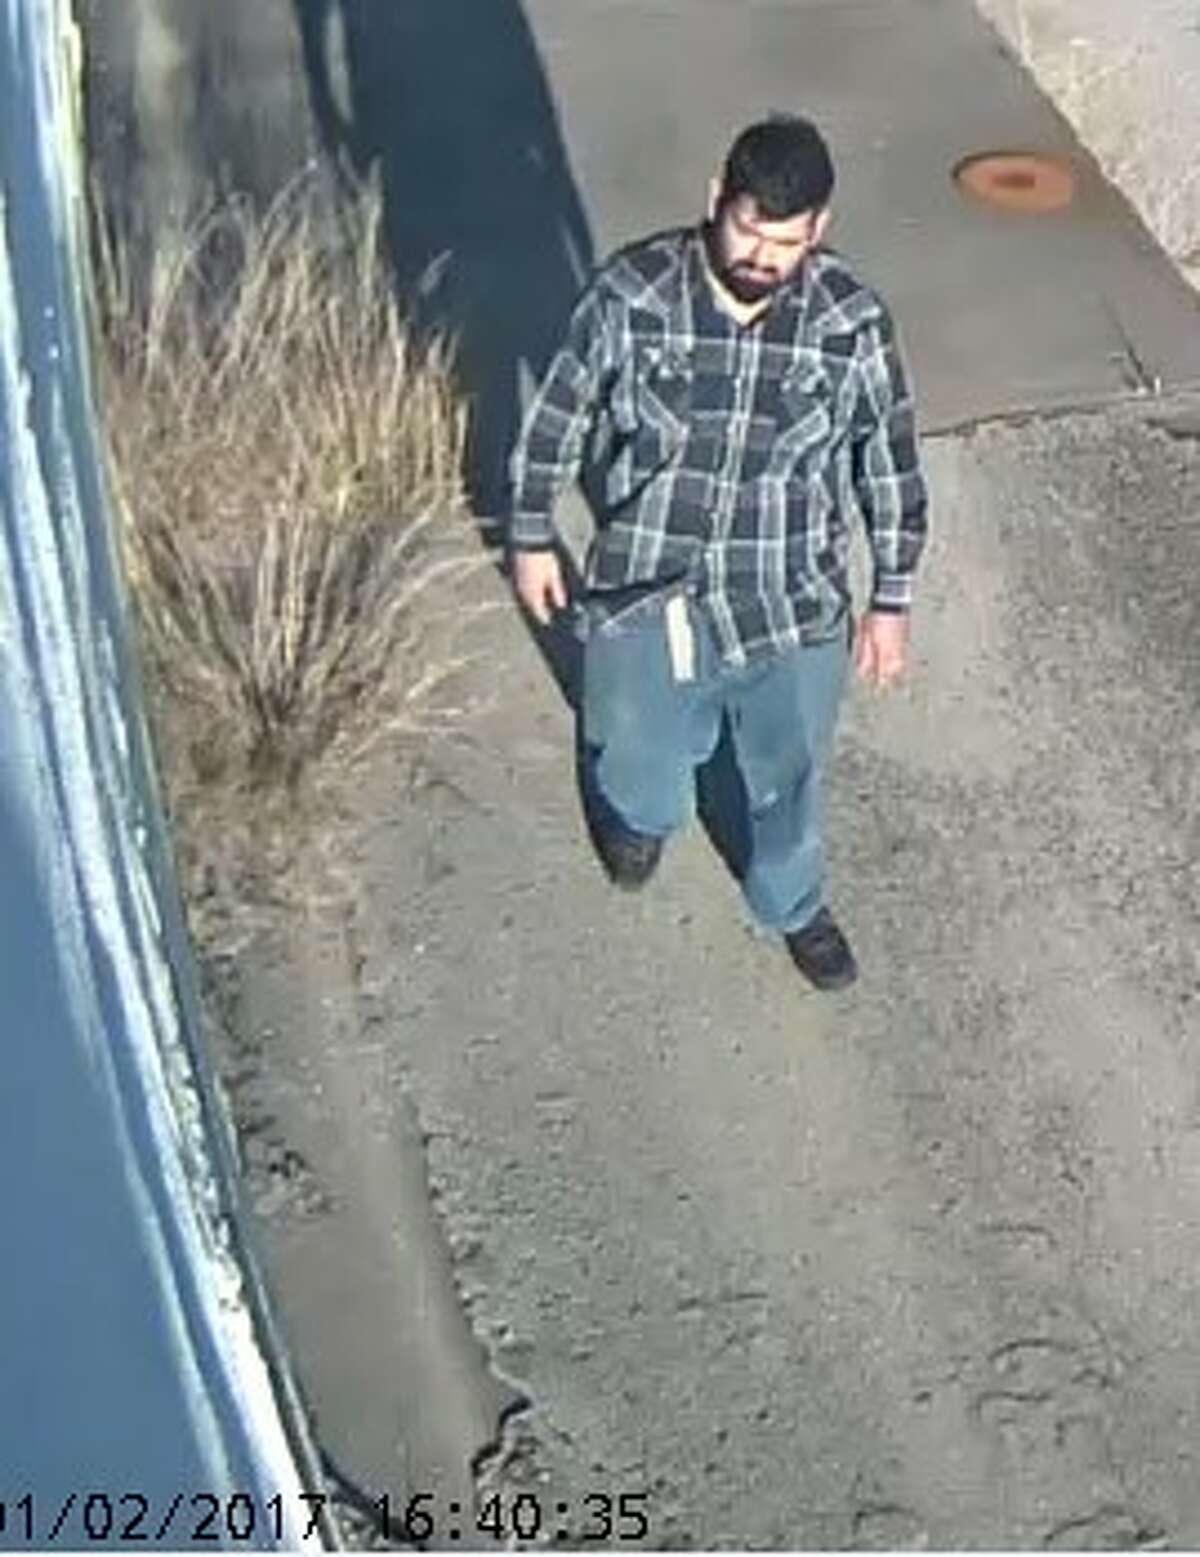 This man allegedly broke into the San Antonio Water System heating and cooling plant to steal several pieces of equipment on Jan. 2, 2017.